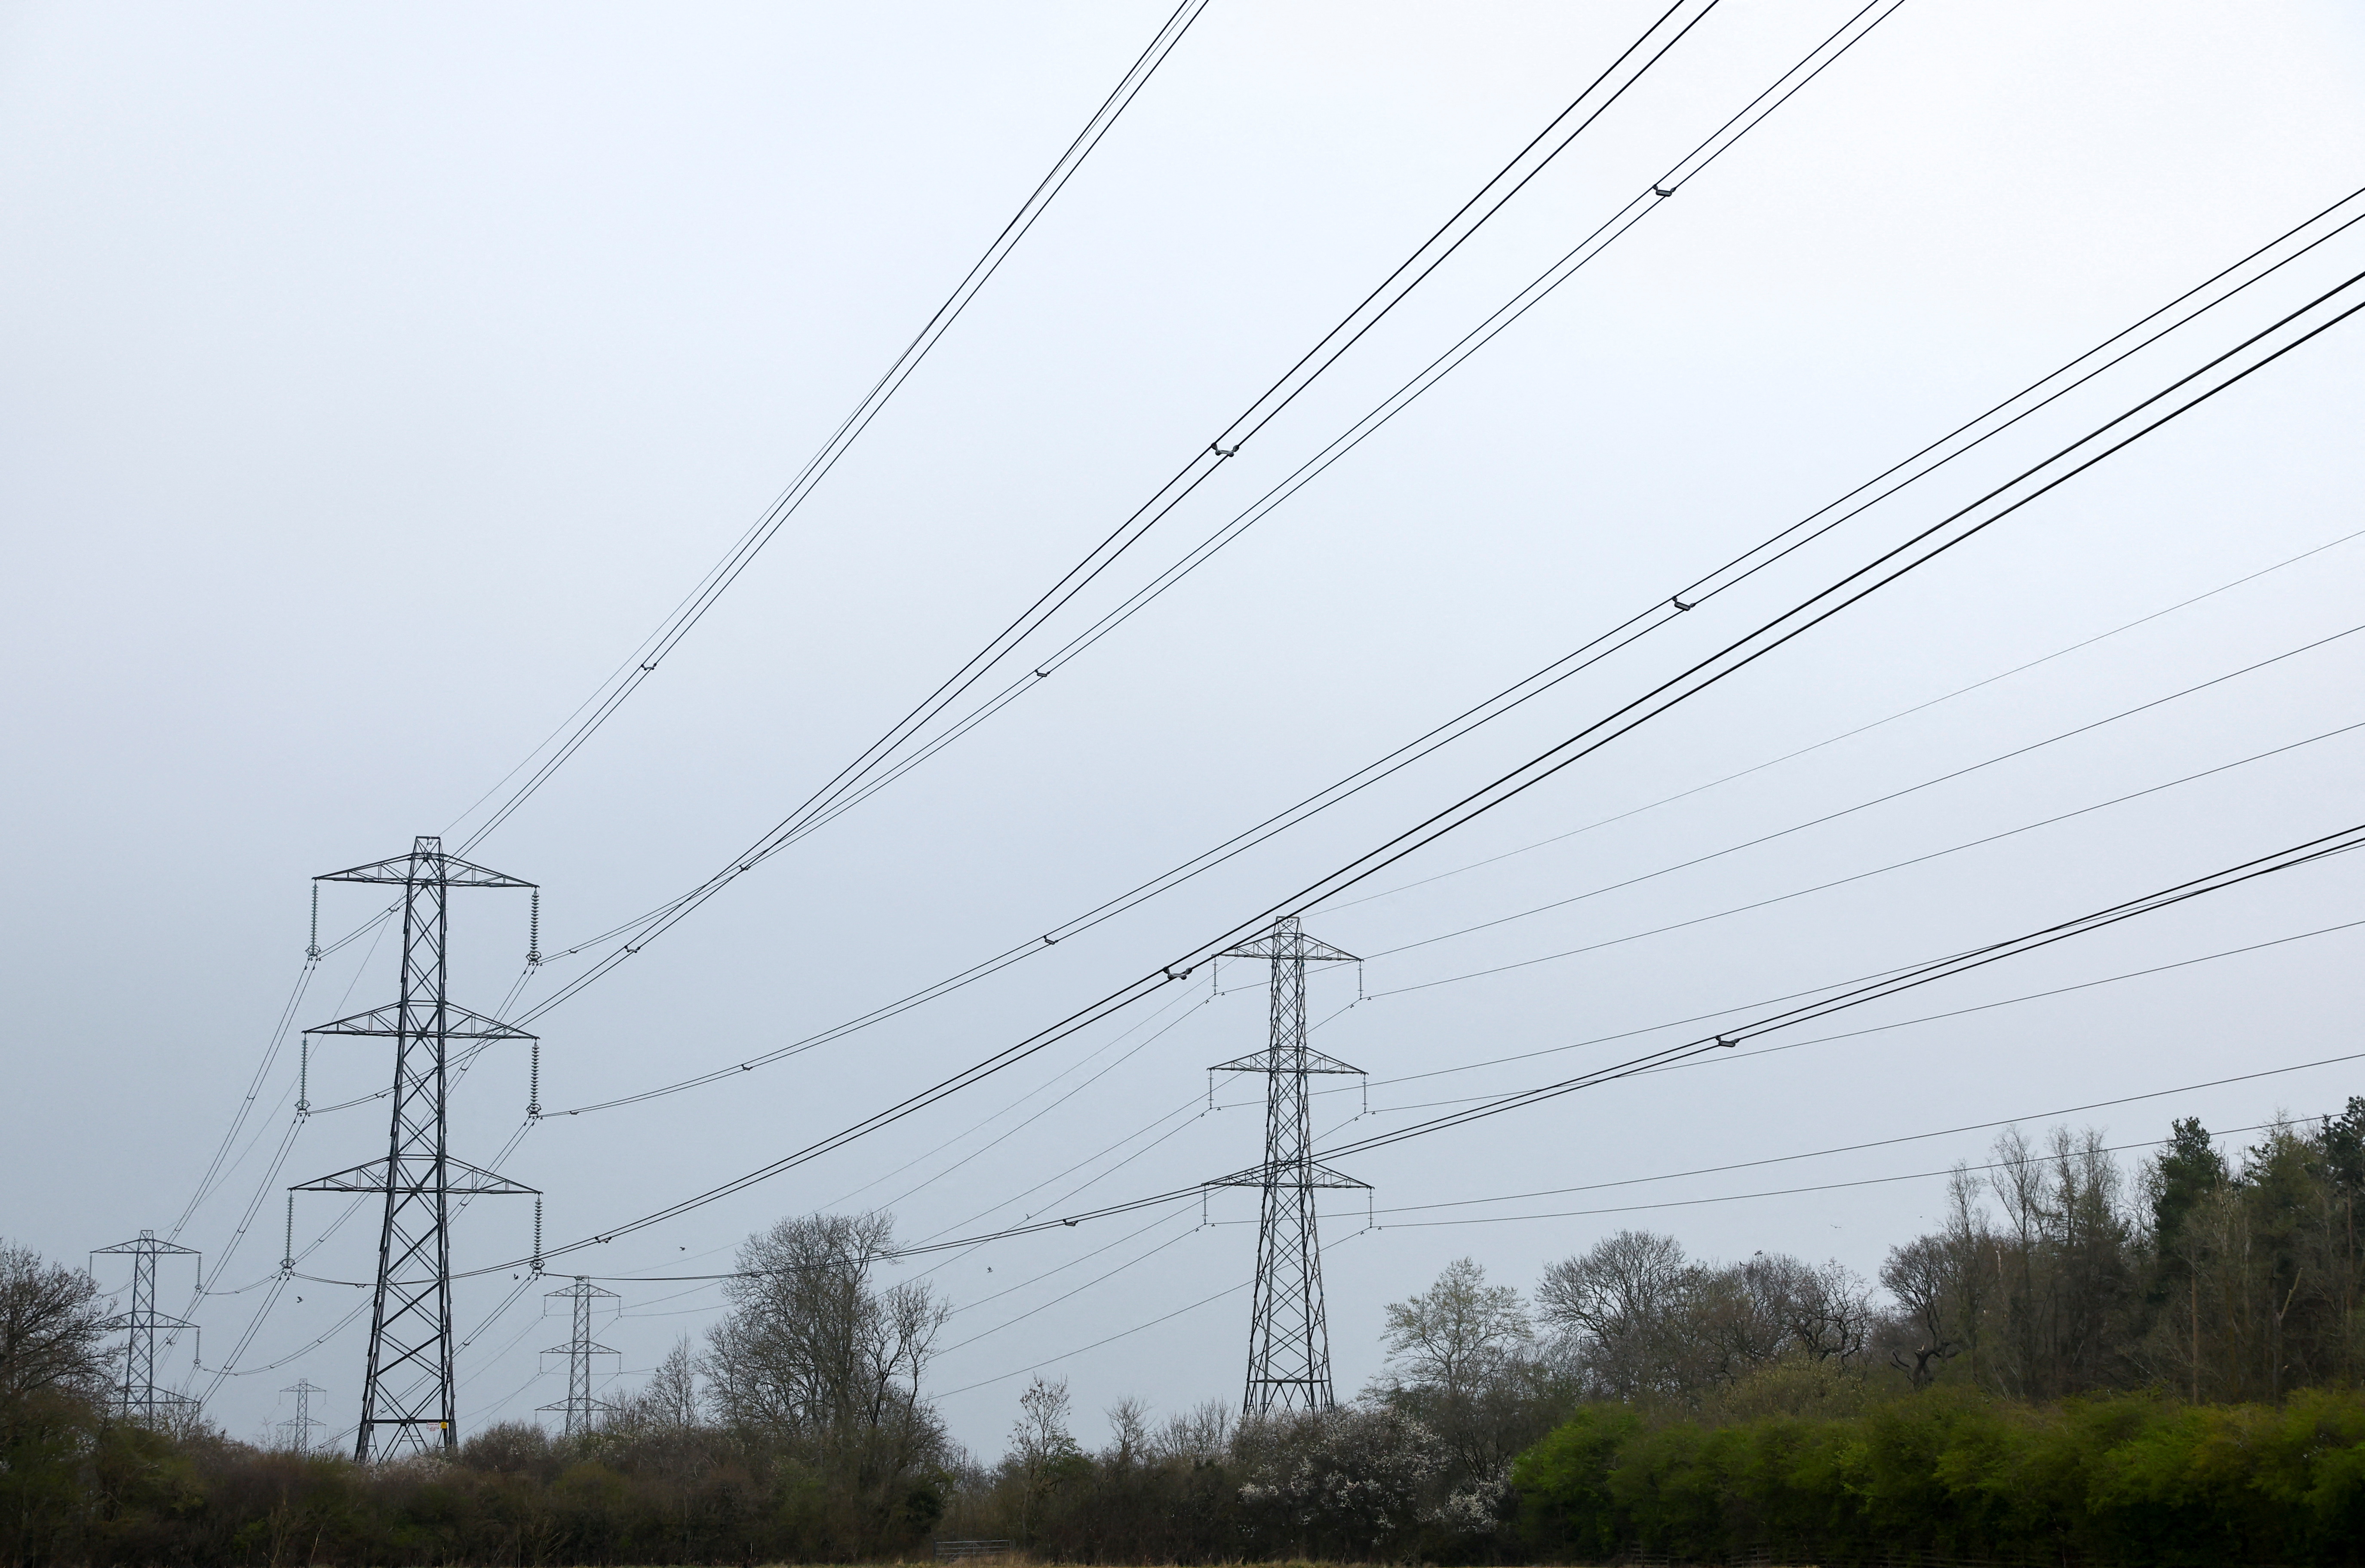 Electricity pylons are seen in Wellingborough